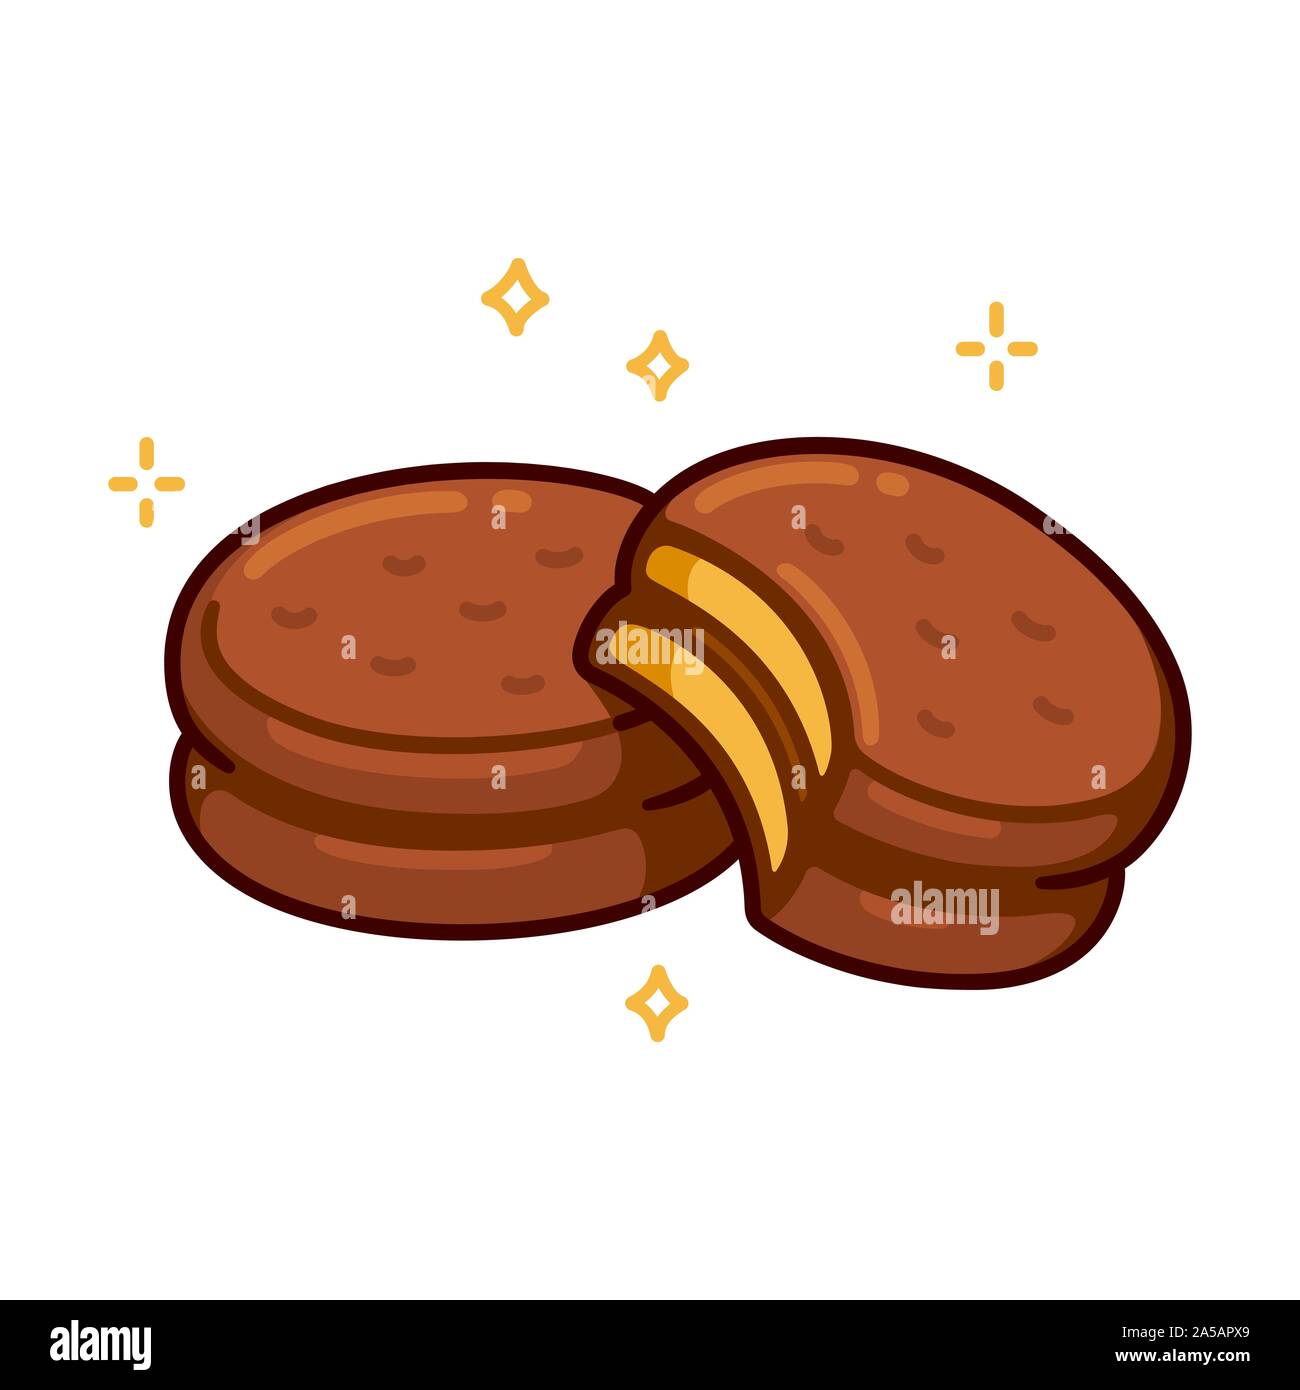 Alfajores, traditional South American chocolate covered cookies with dulce de leche filling. Isolated vector clip art illustration, cute cartoon style Stock Vector